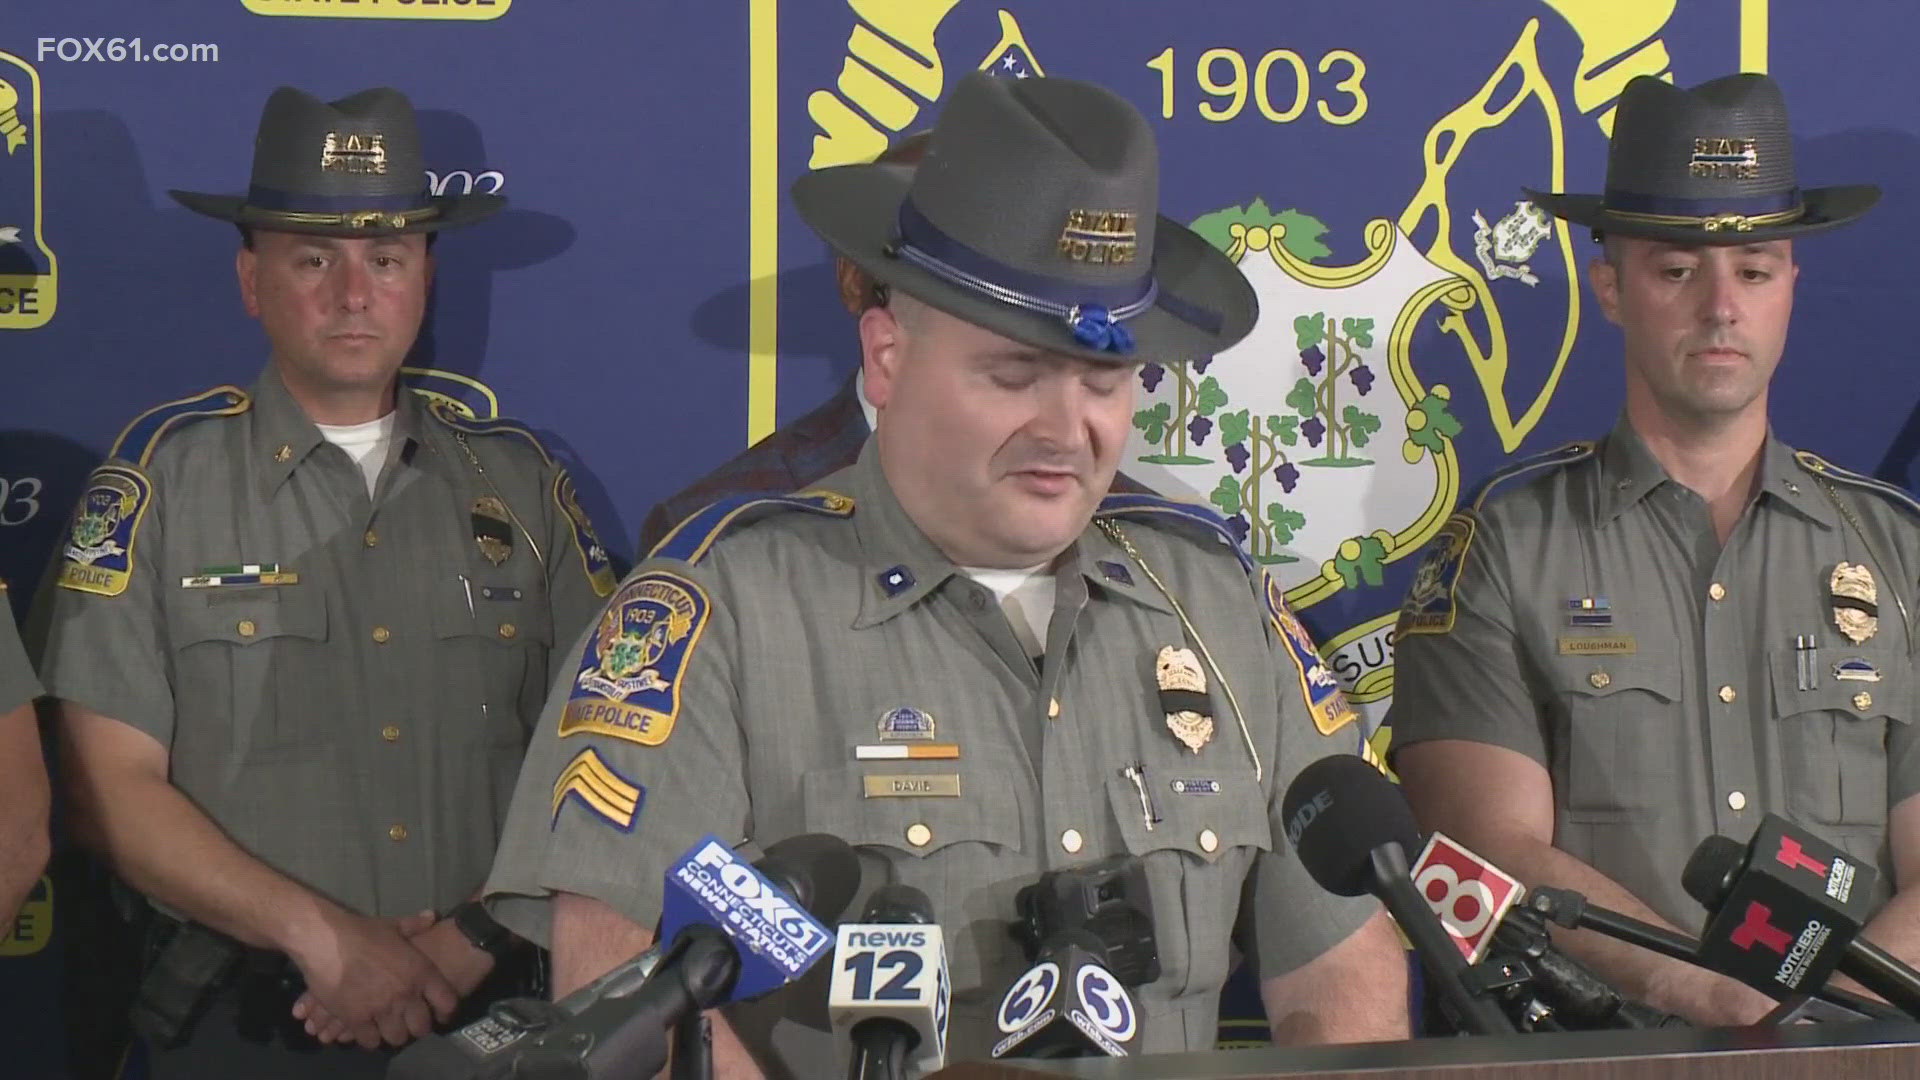 State police provided an update on the line of duty death of Trooper Aaron Pelletier in a press conference Thursday night.